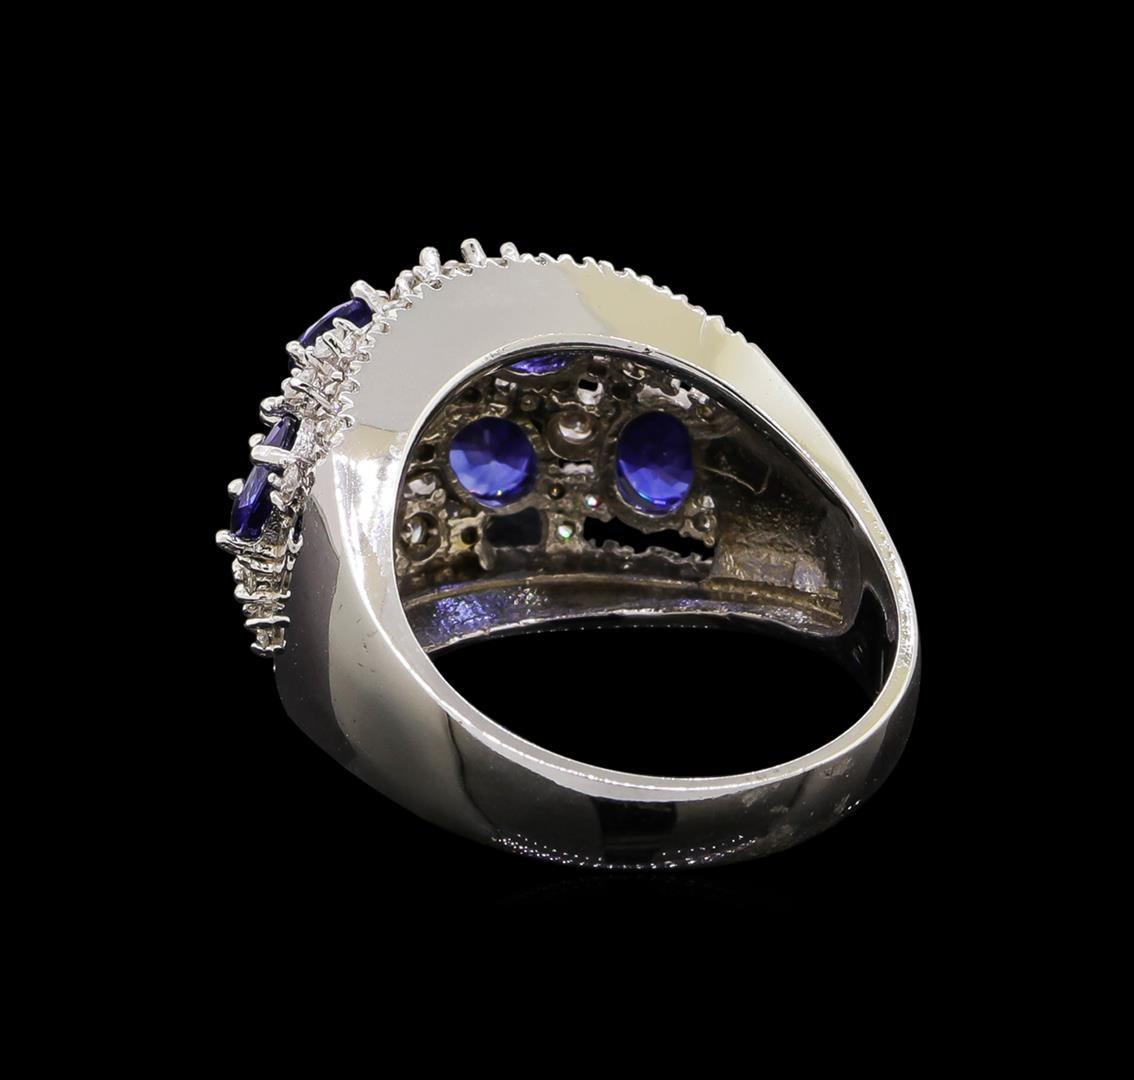 14KT White Gold 2.34 ctw Sapphire and Diamond Ring